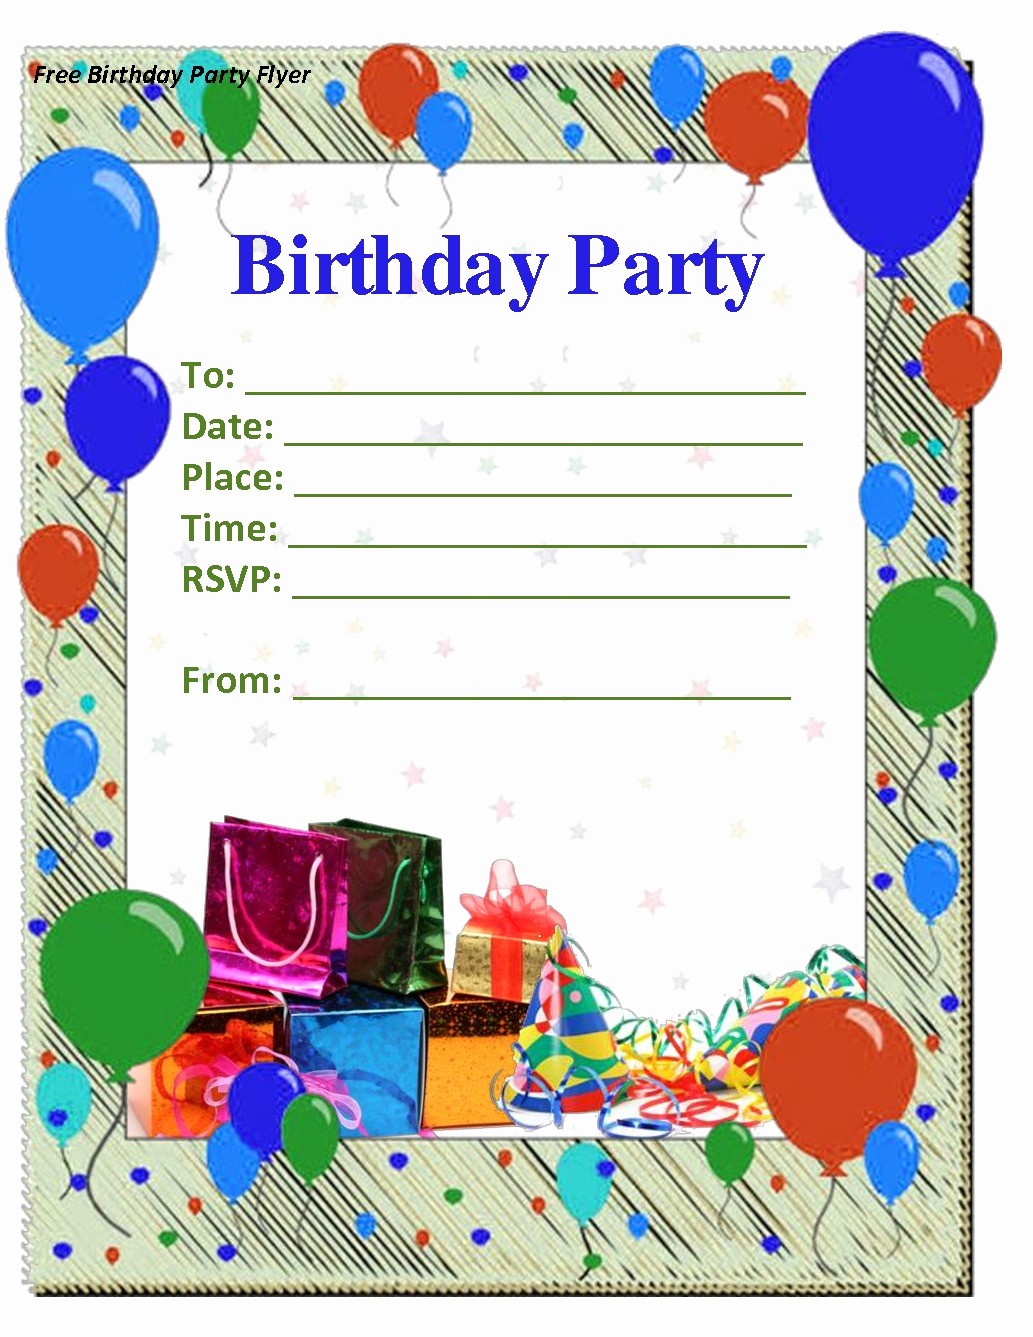 Birthday Invitation Card Template Free Awesome Birthday Invitation Template